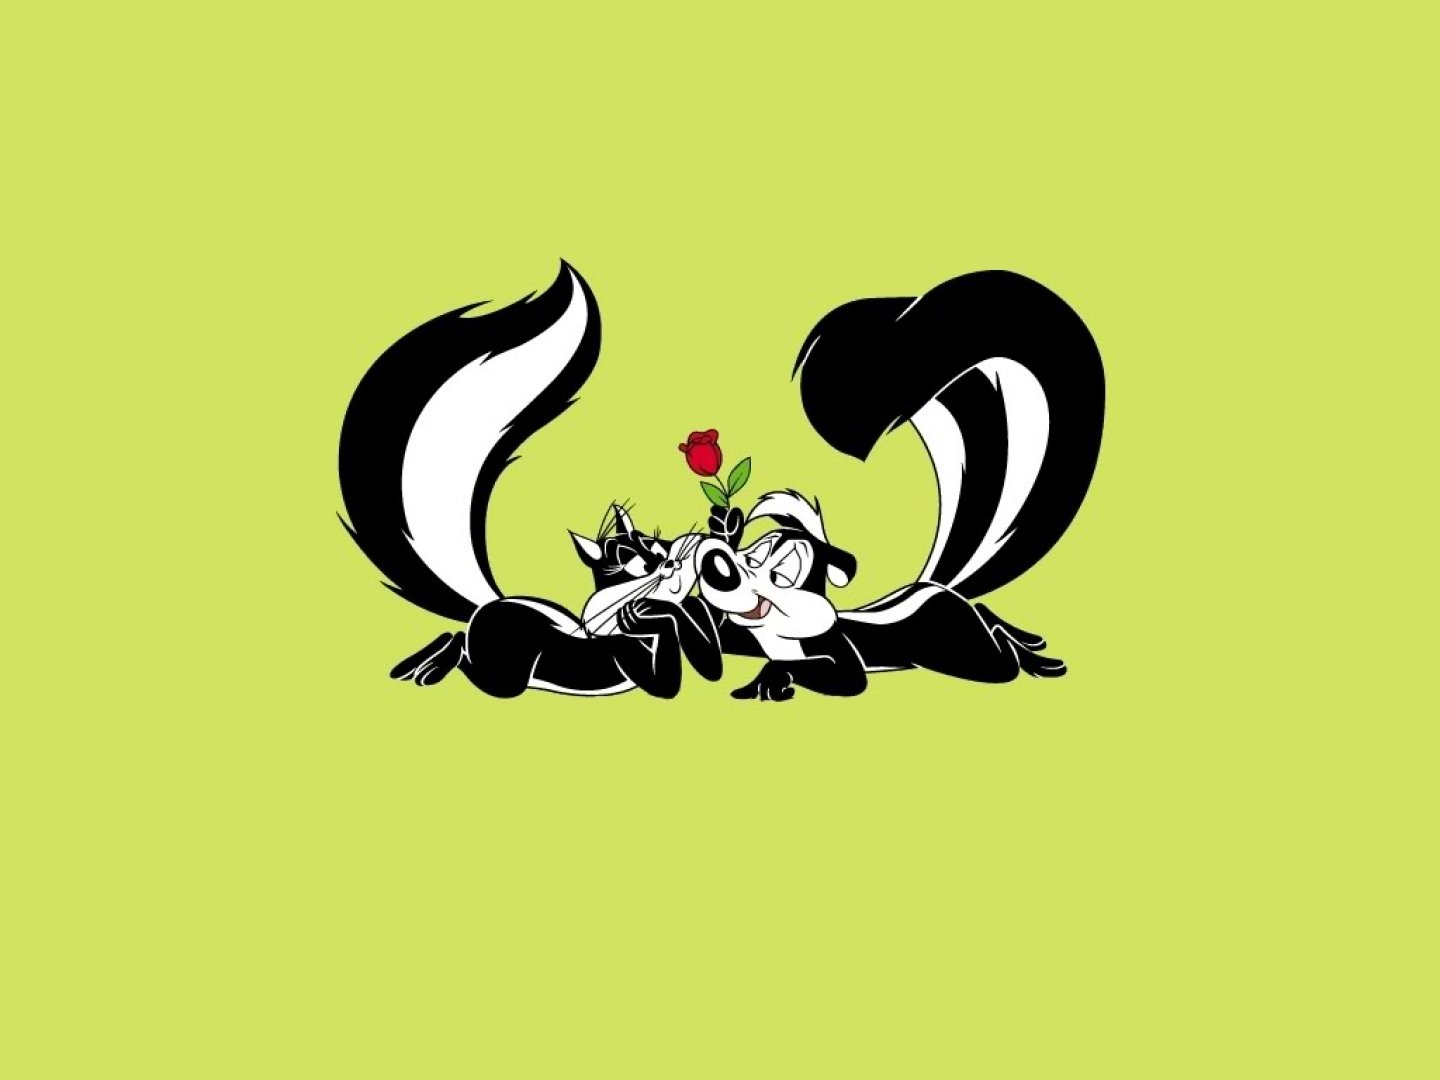 pepe, Le, Pew, Looney, Tunes, French, France, Comedy, Family, Animation, 1pepepew, Skunk, Cat, Romance Wallpaper